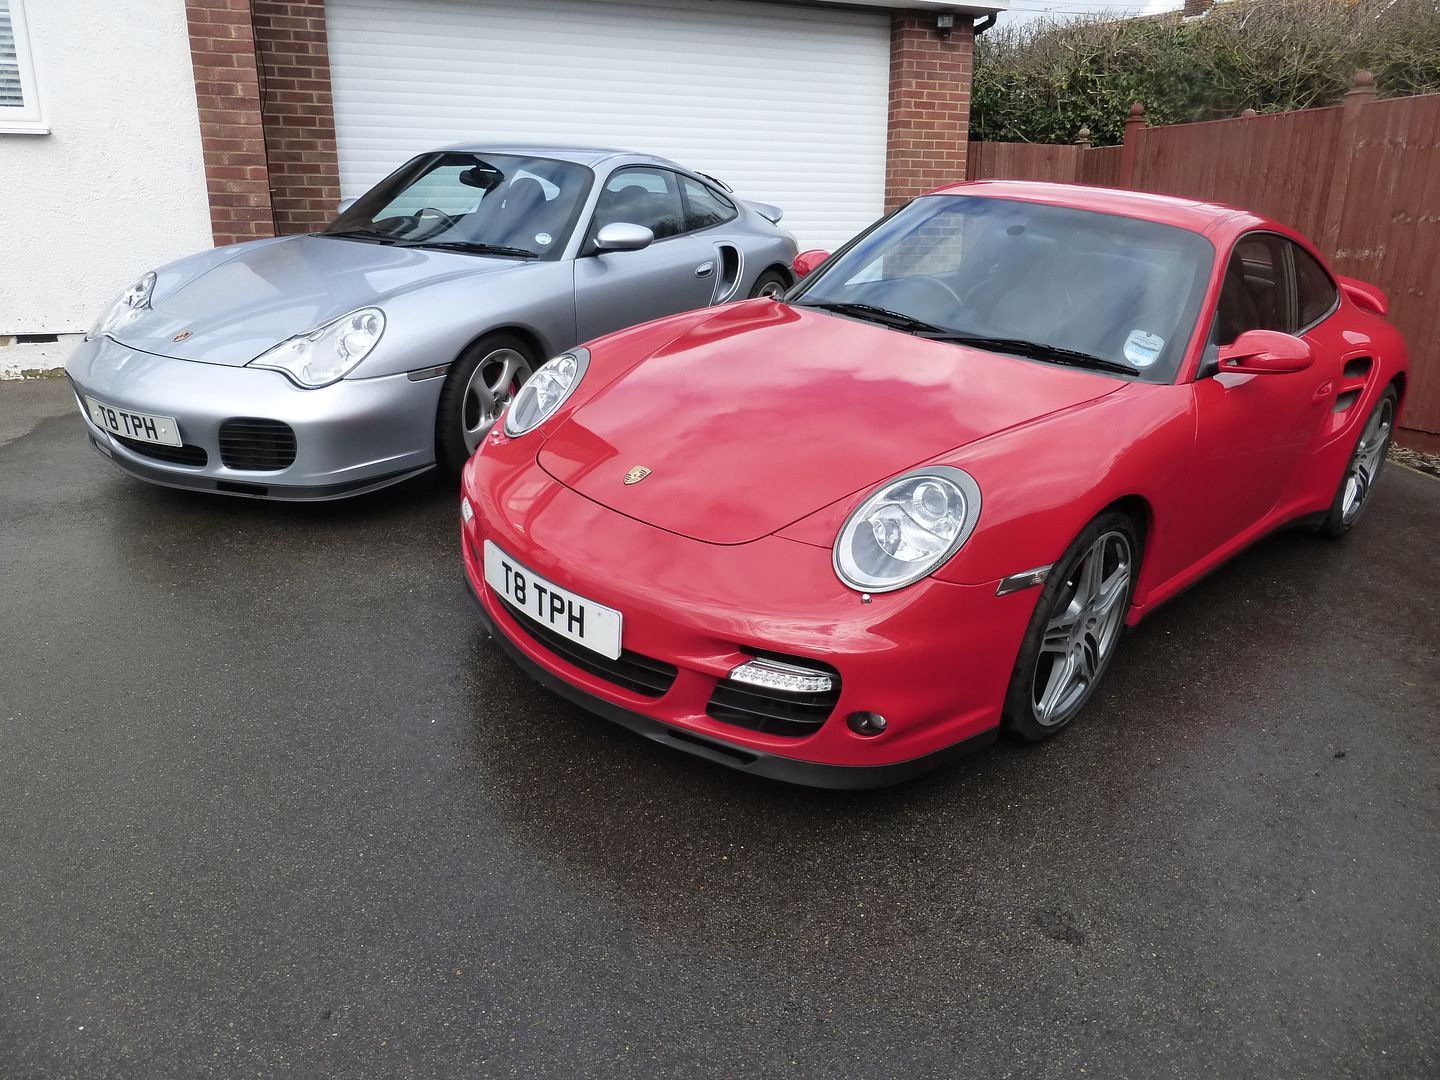 911uk.com - Porsche Forum : View topic - Glut of 996 Turbos on the market